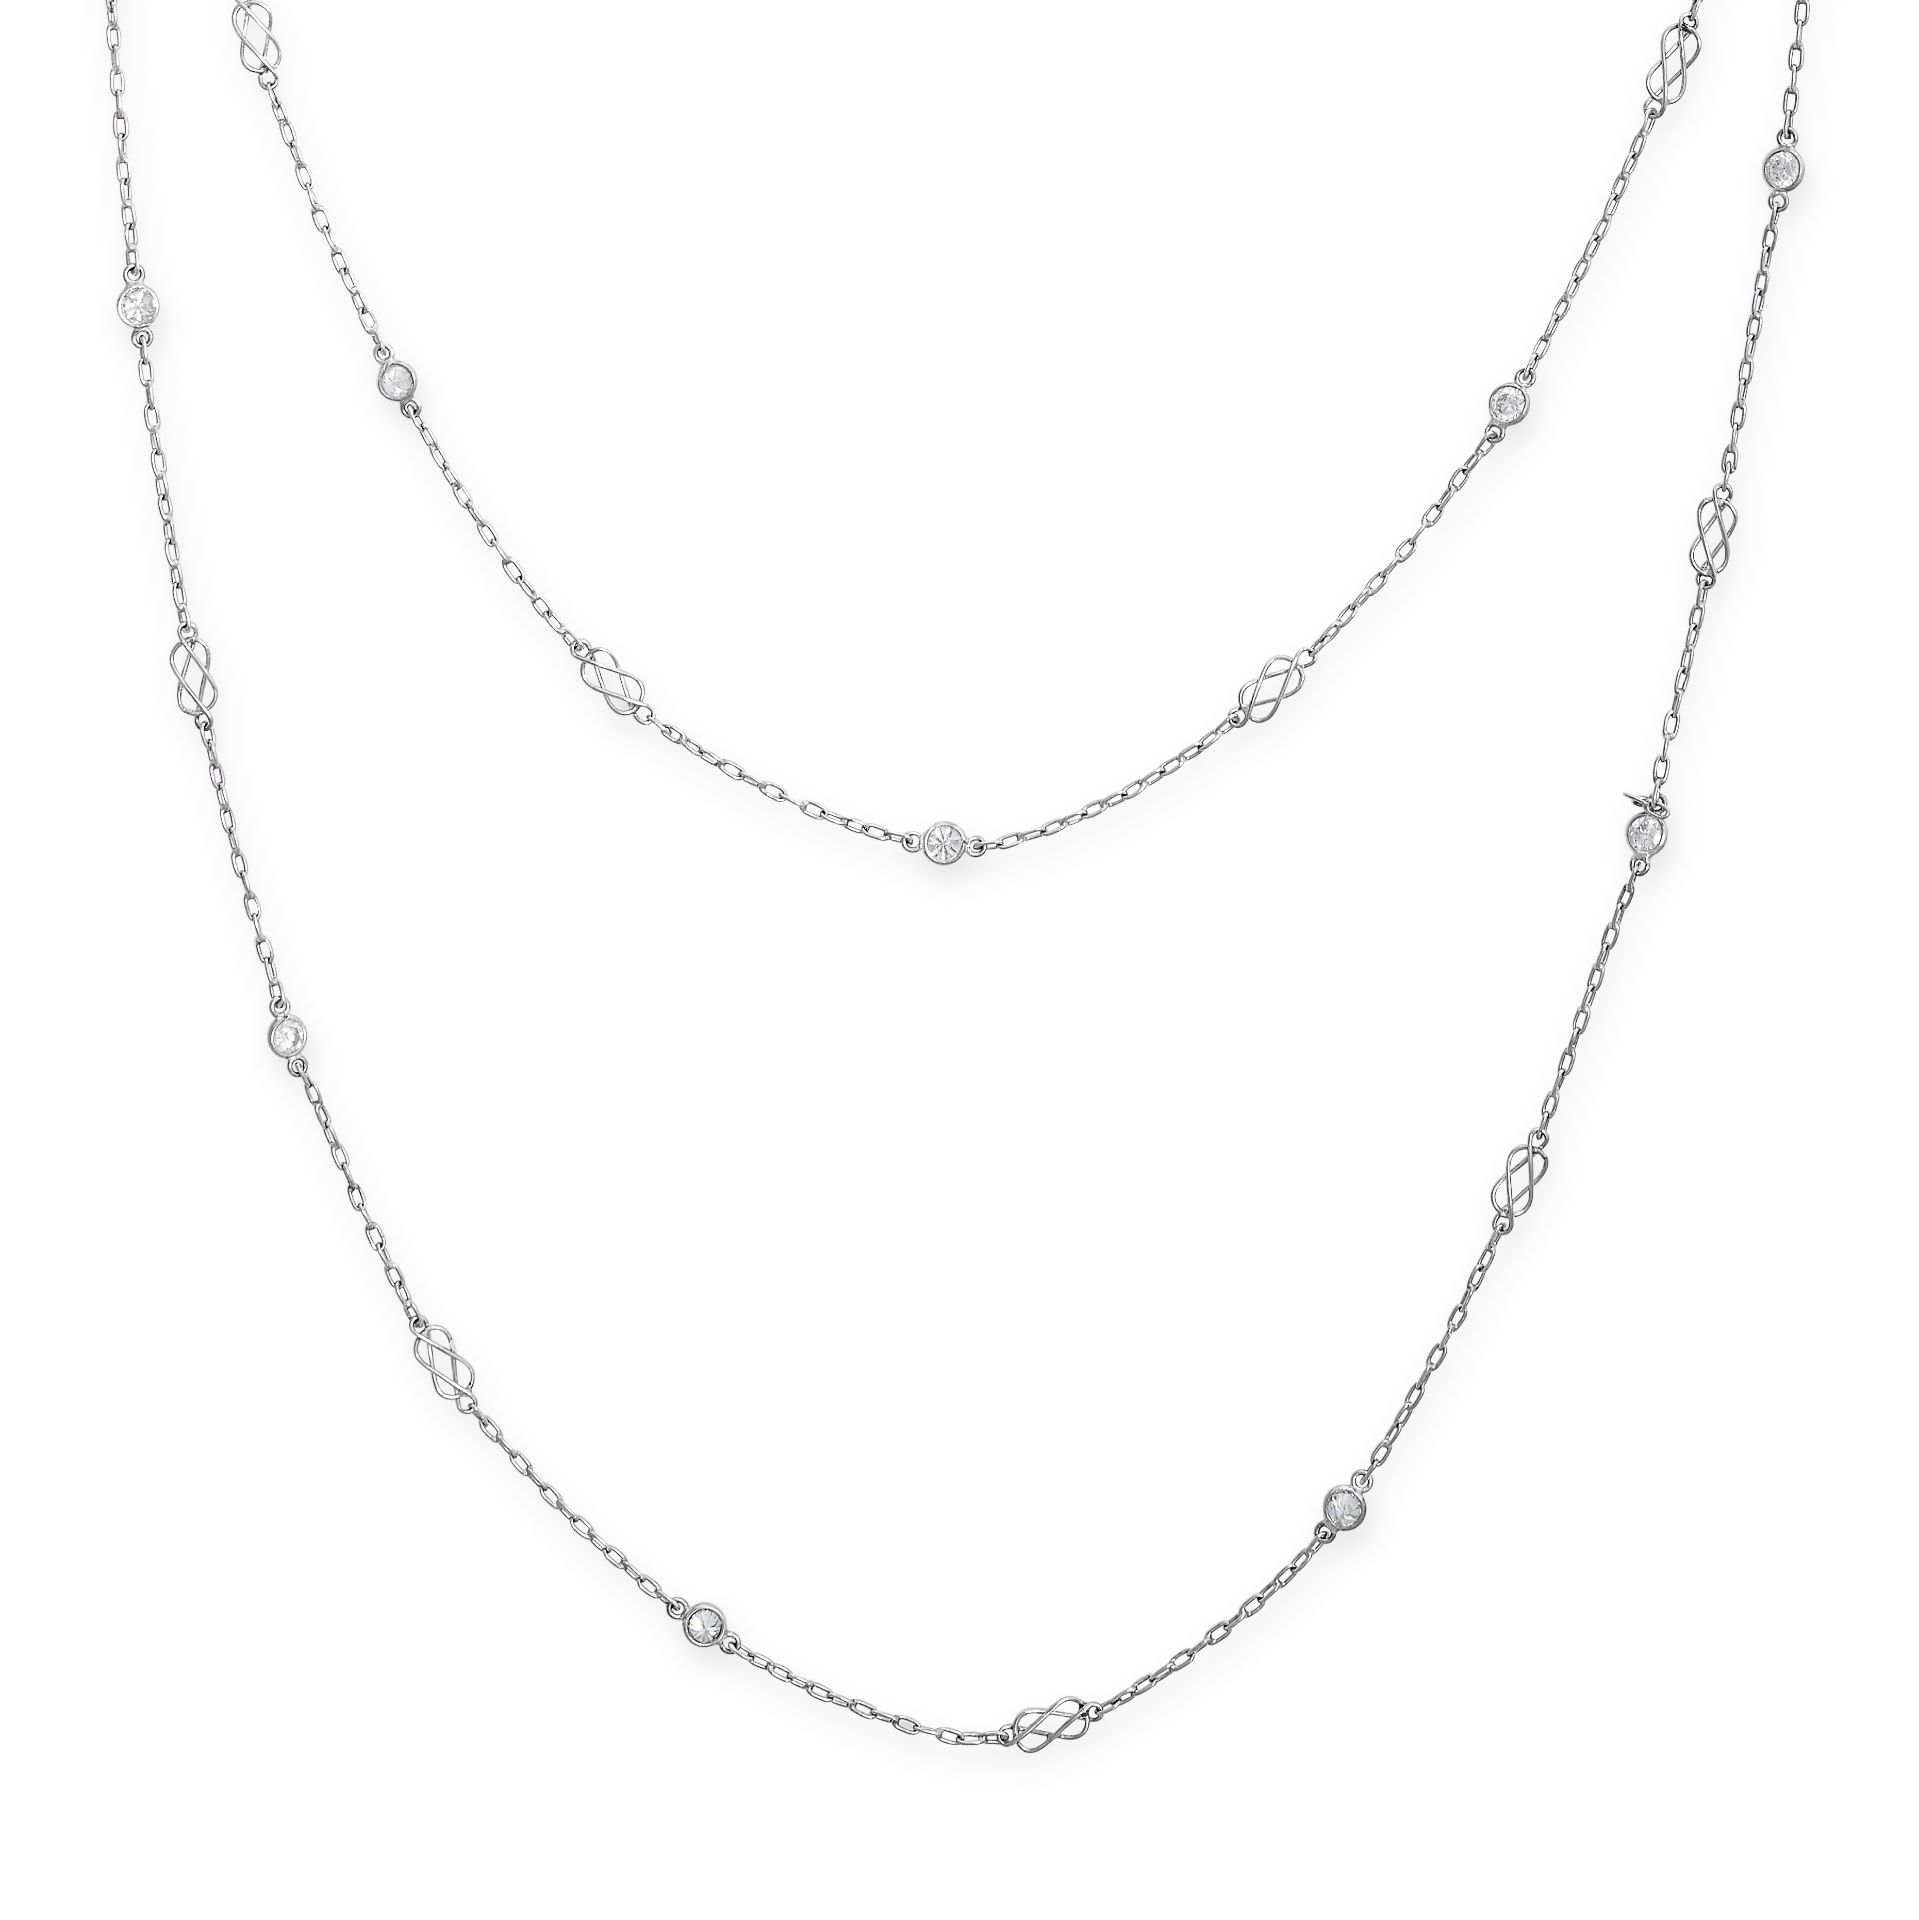 AN ART DECO DIAMOND CHAIN SAUTOIR / NECKLACE in platinum, the long chain with alternating round